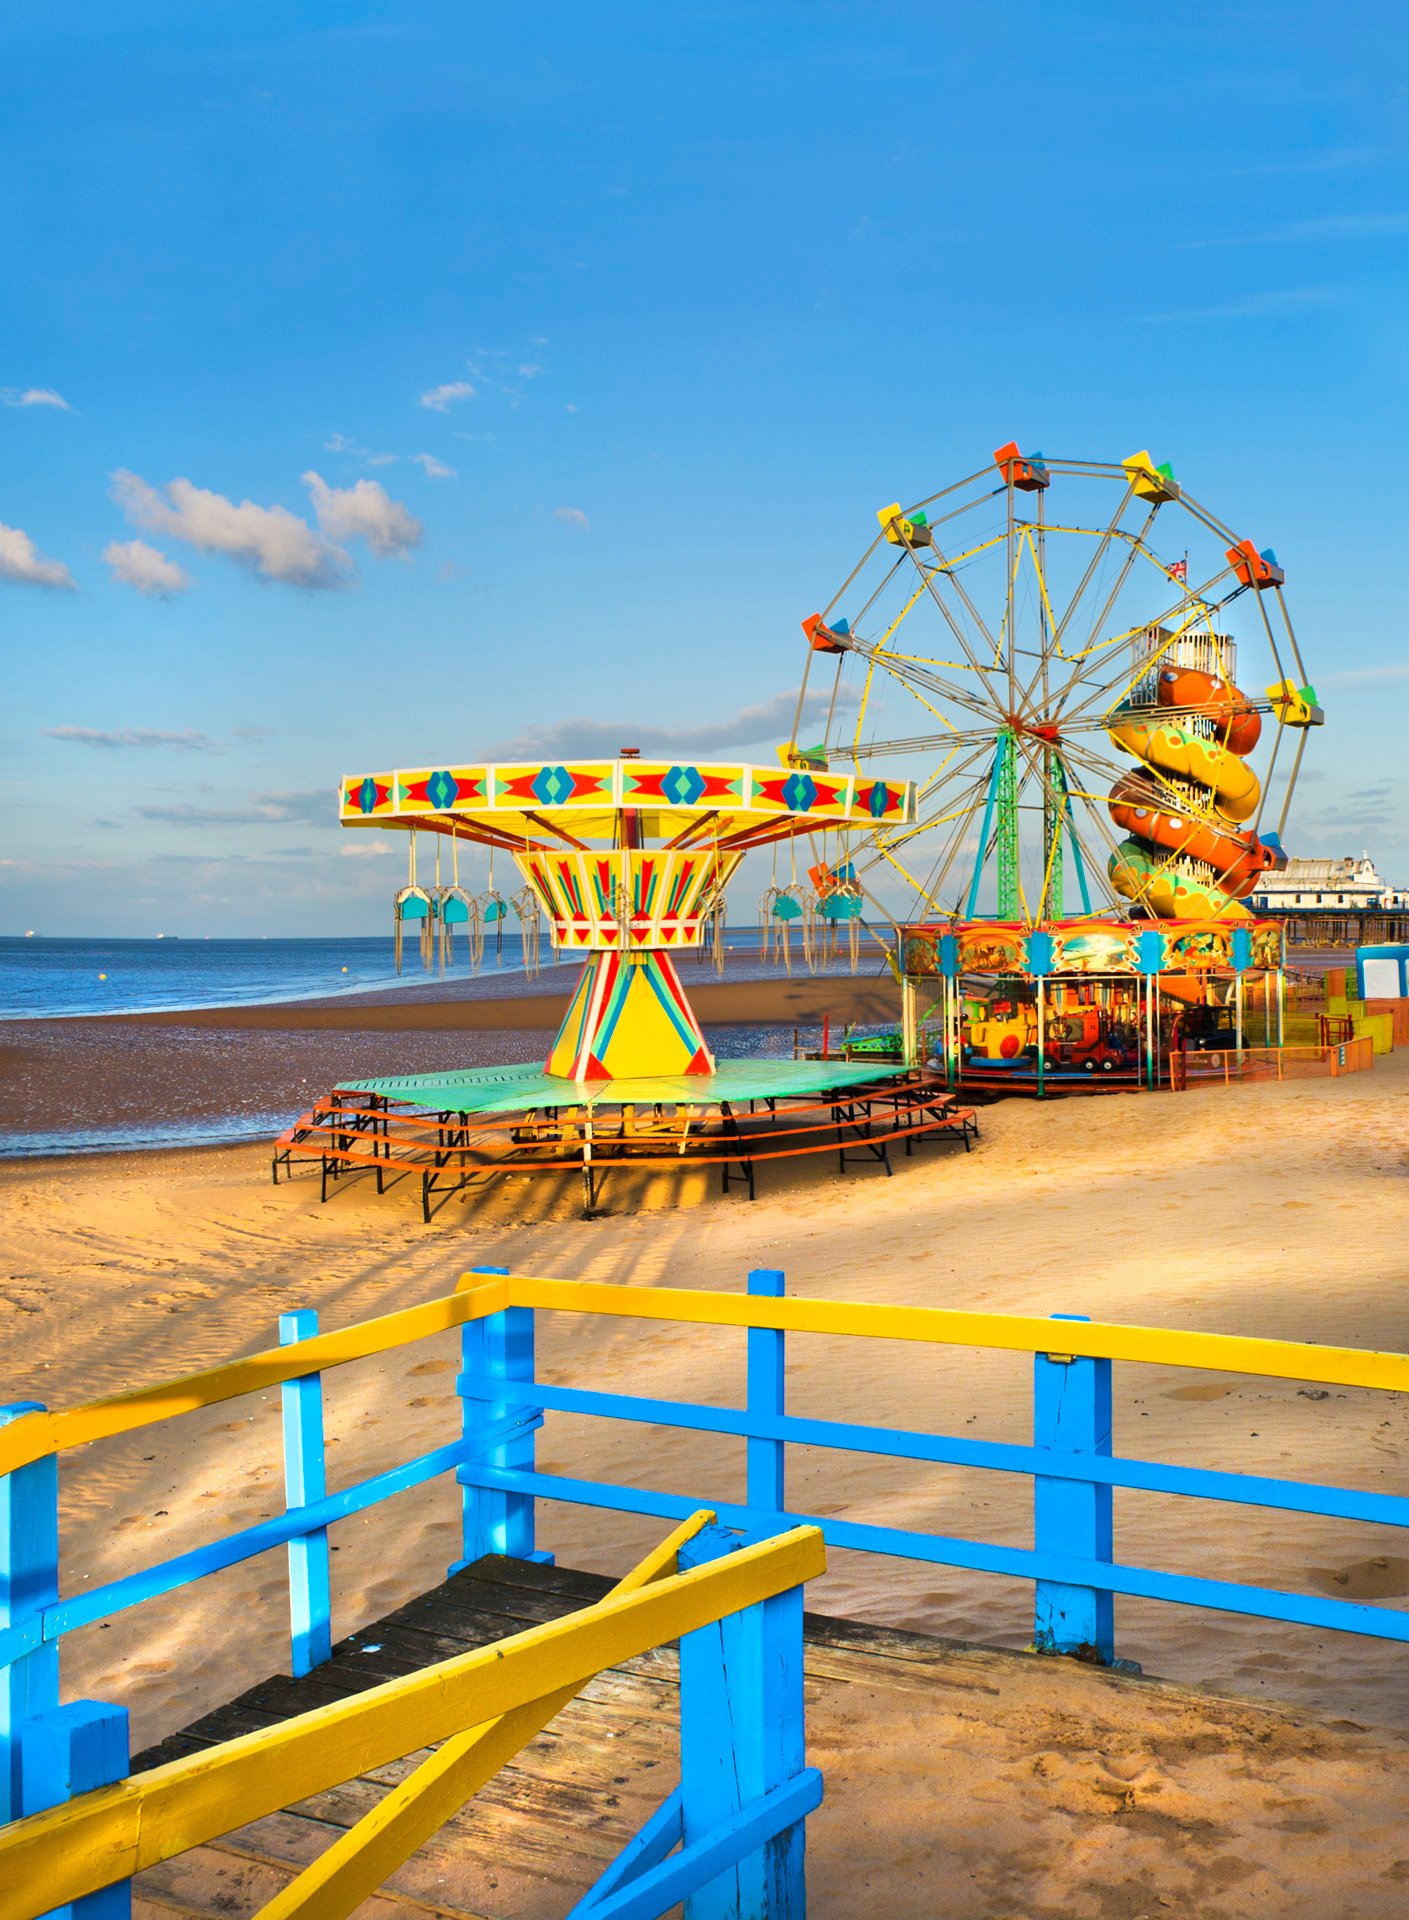 Colourful amusement rides on the beach at Mablethorpe, Lincolnshire.